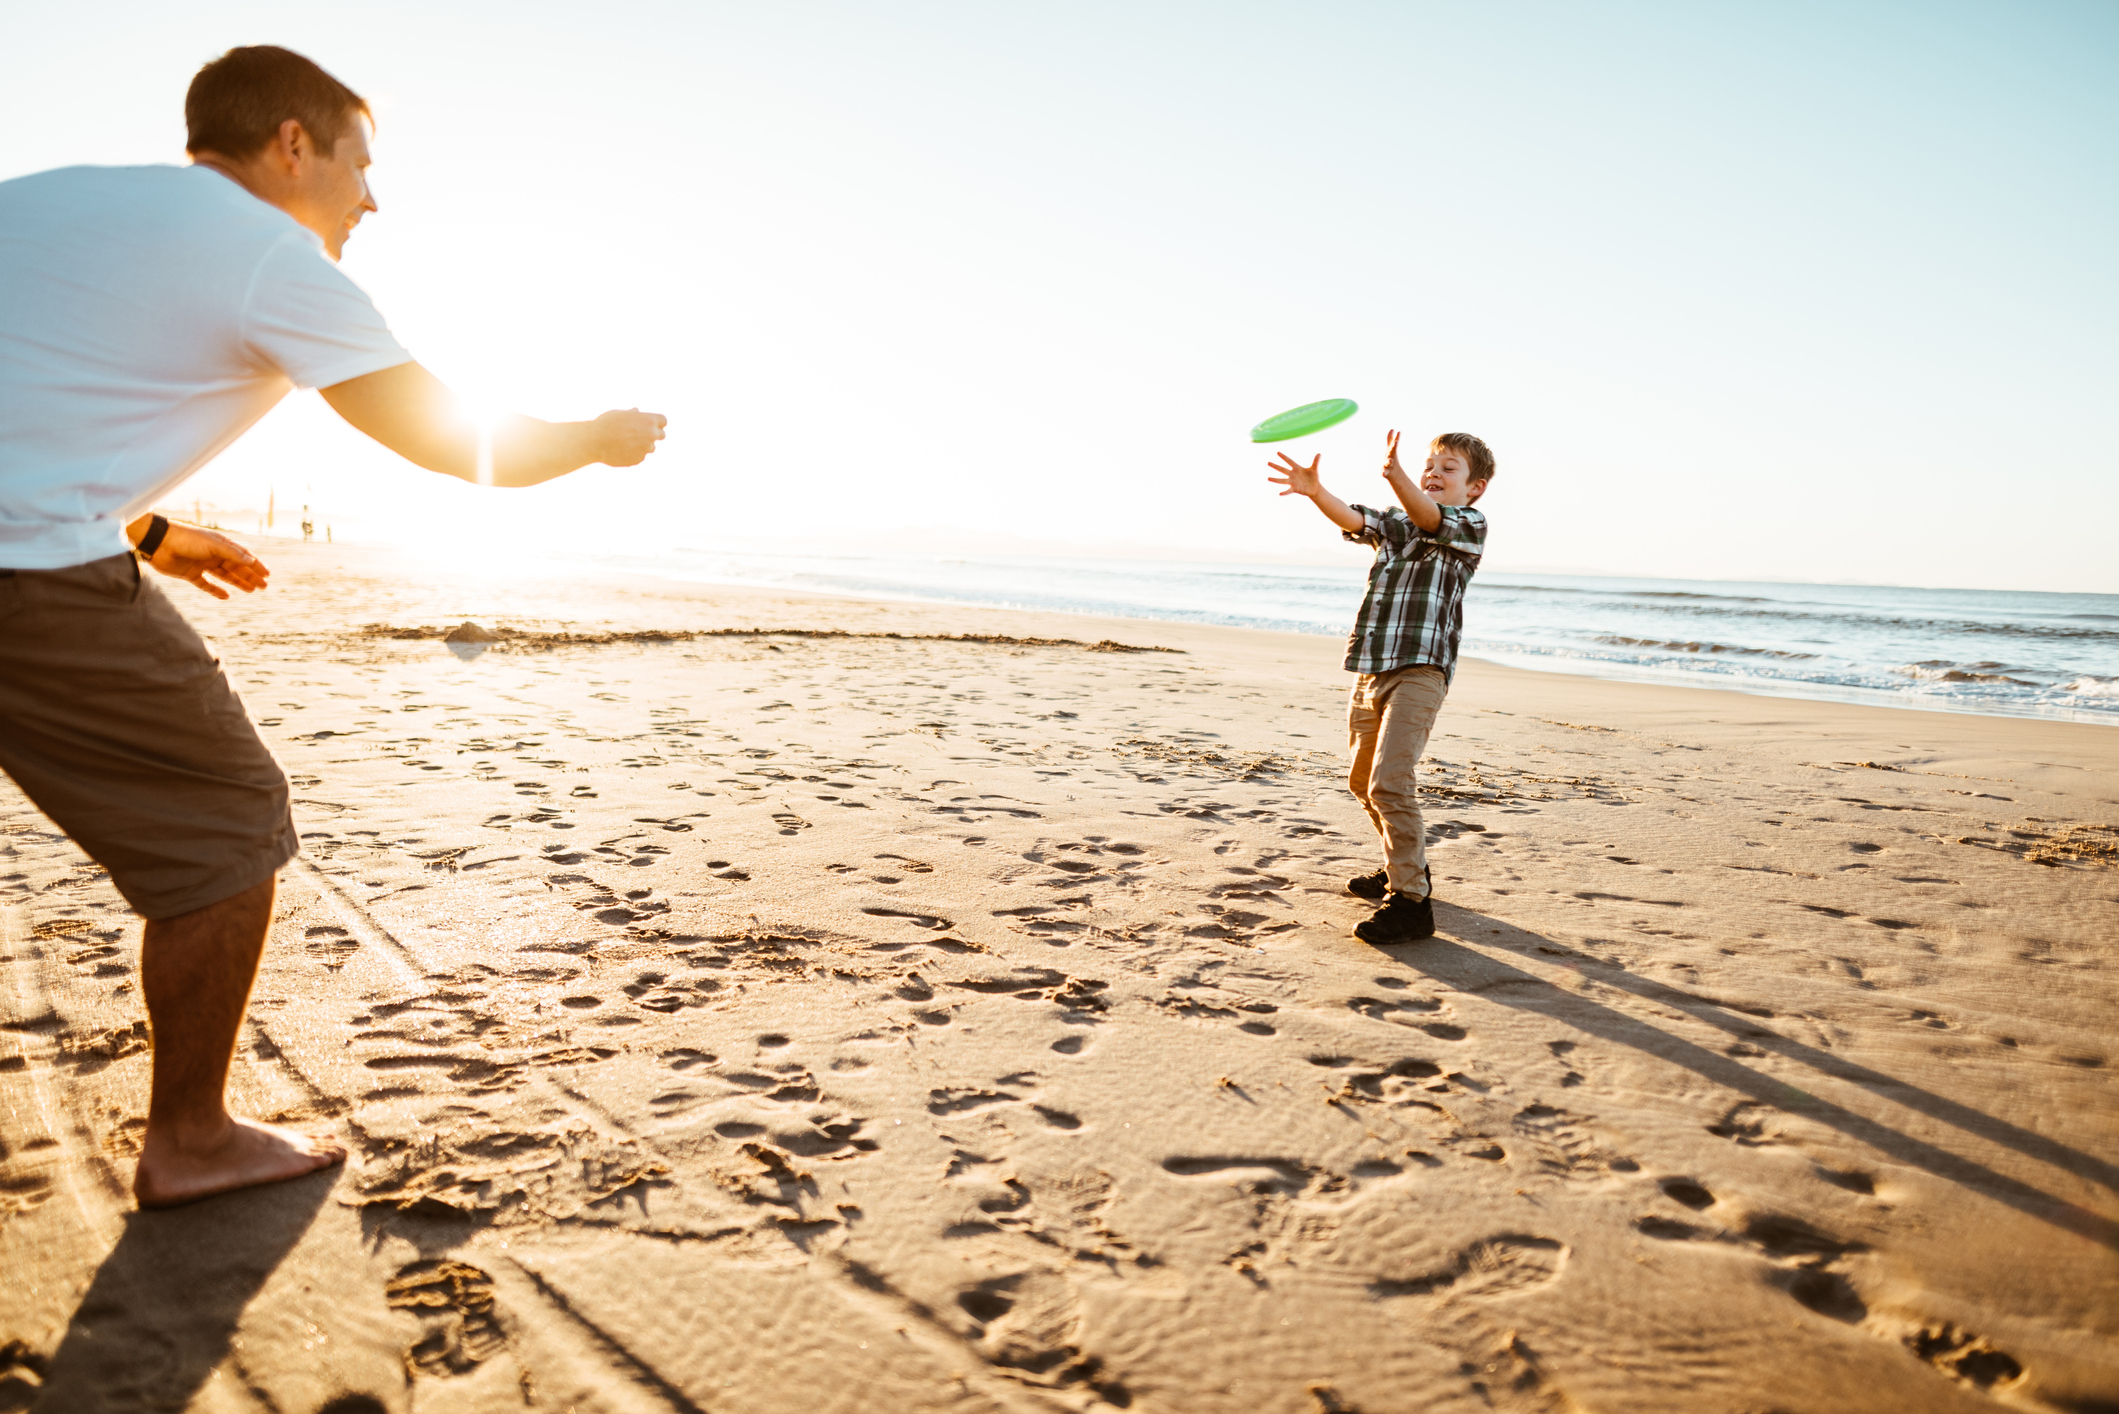 father and son playing fresbee at the beach - stock photo